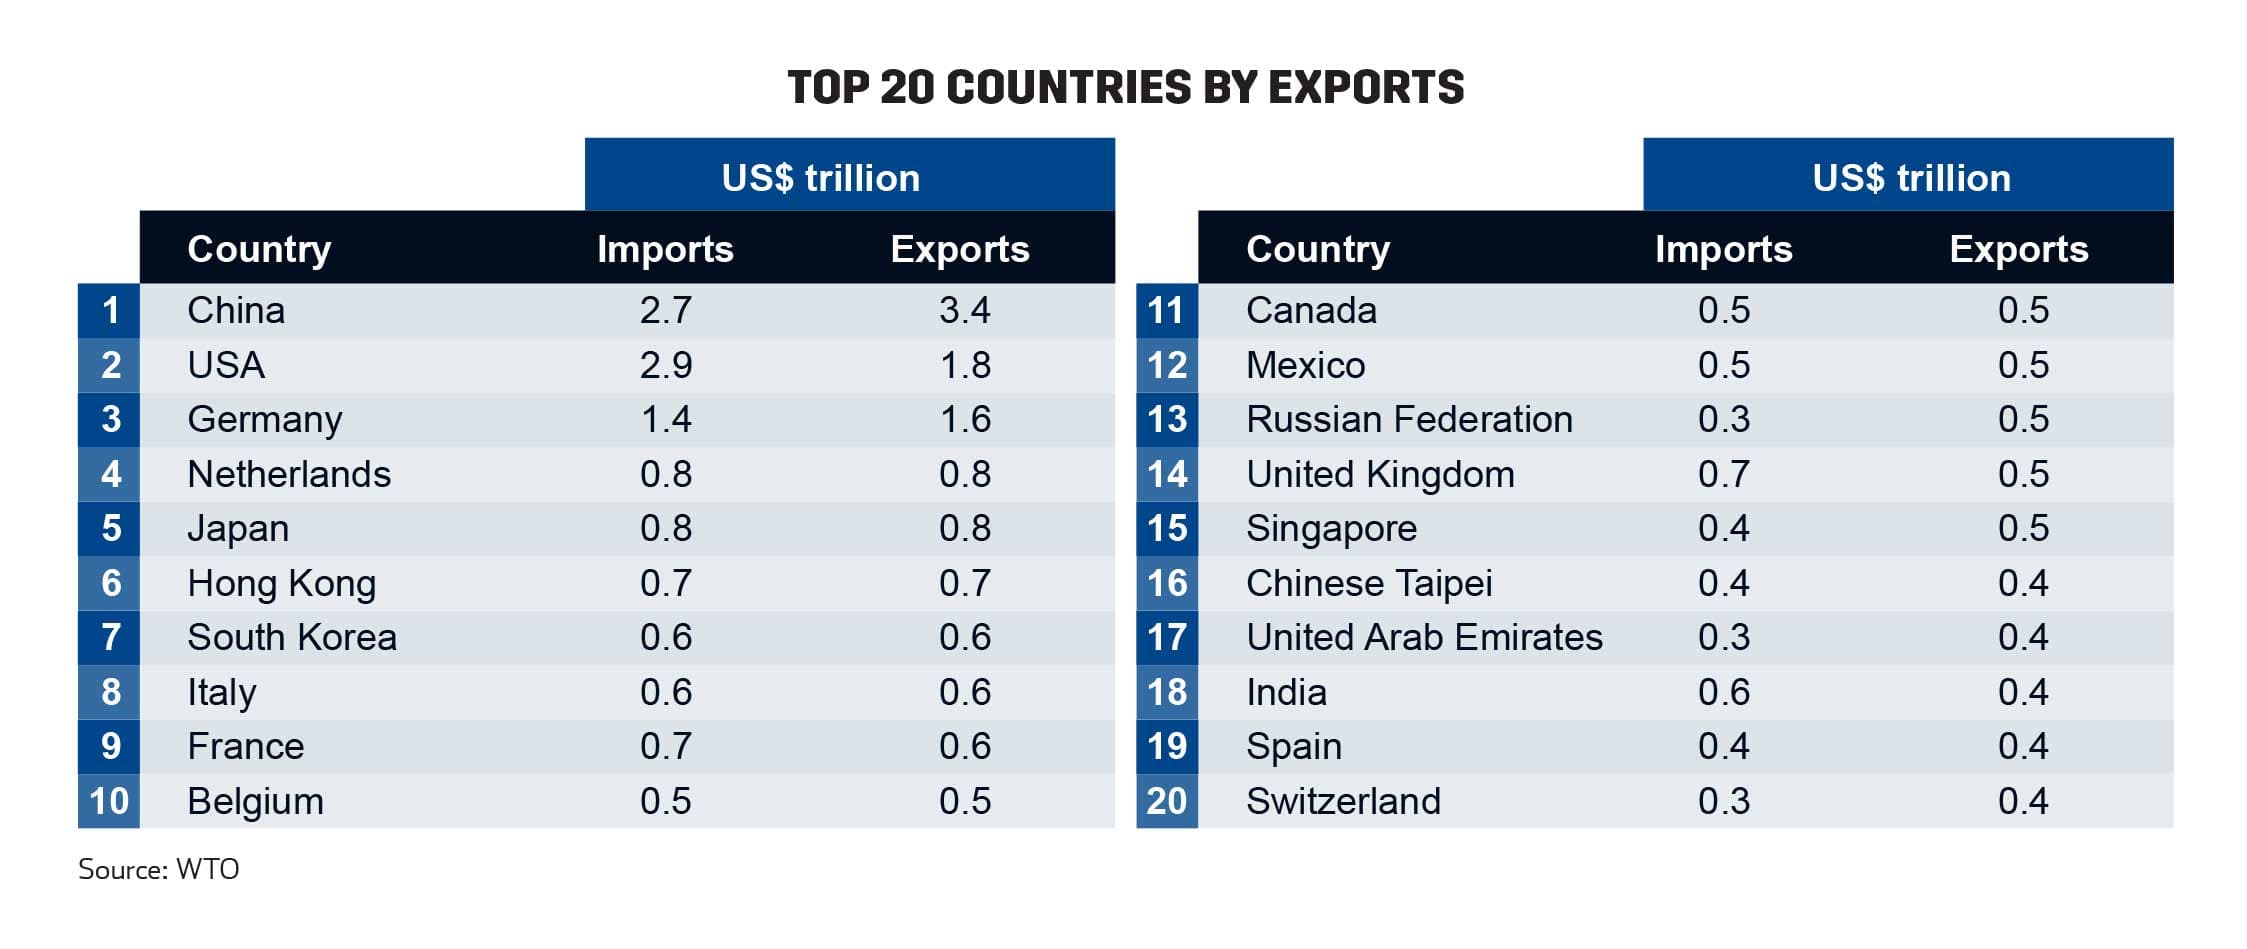 Top 20 Countries by Exports